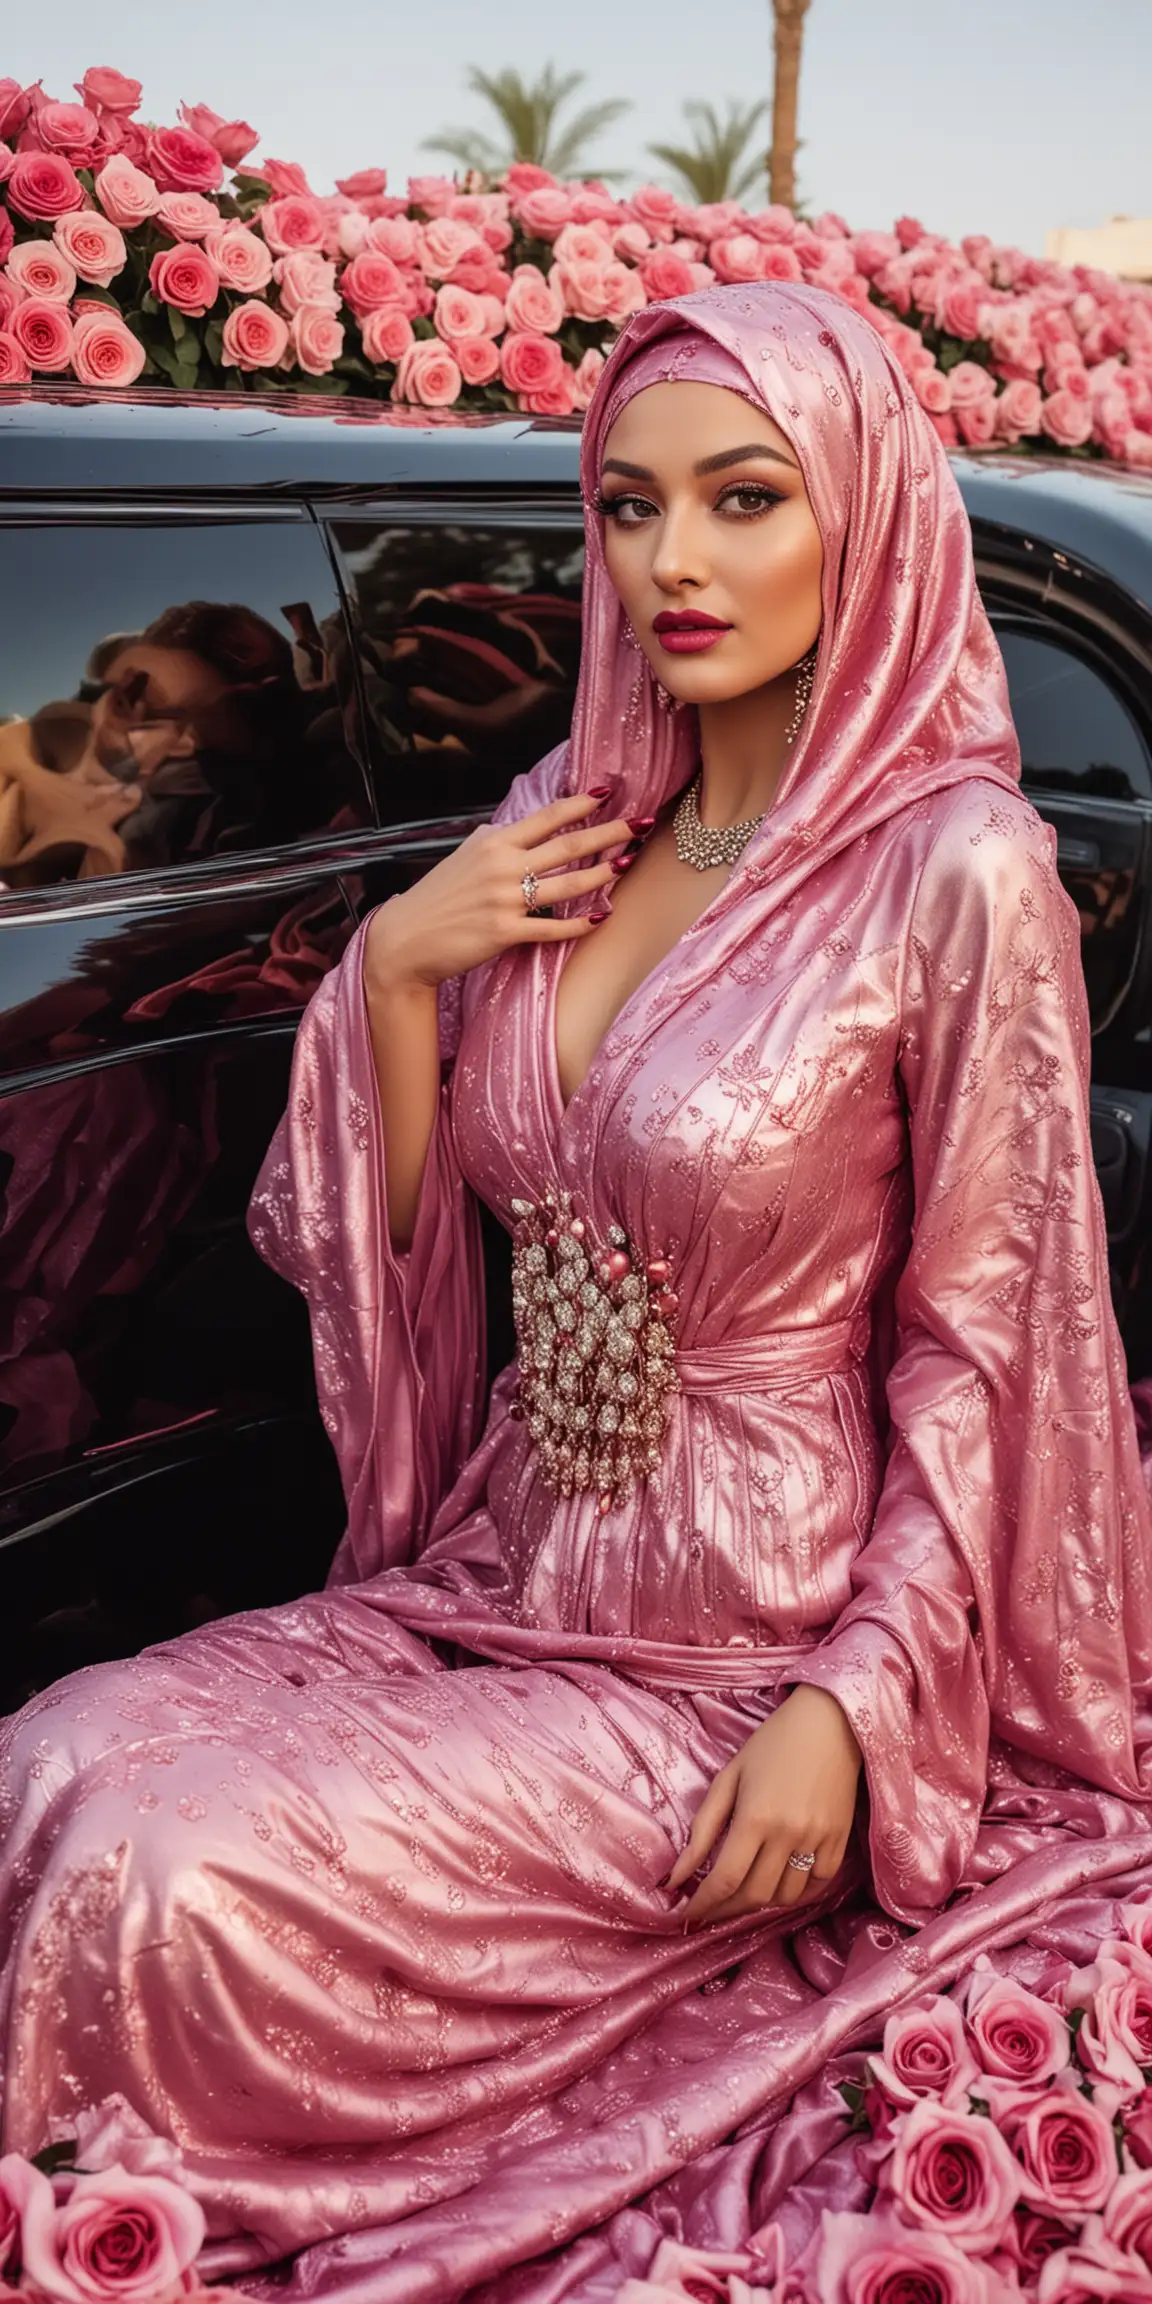 Expensive stretch limo in Dubai. Newlywed, Fair-skinned, shy, big-breasted Arab Muslimah in heavy gaudy lipstick, bridal makeup & jewellery, 5” patent leather Louboutin heels, wearing a magenta shiny lustrous metallic chiffon abaya her face covered beneath fabric. She is sensuously posing in roses